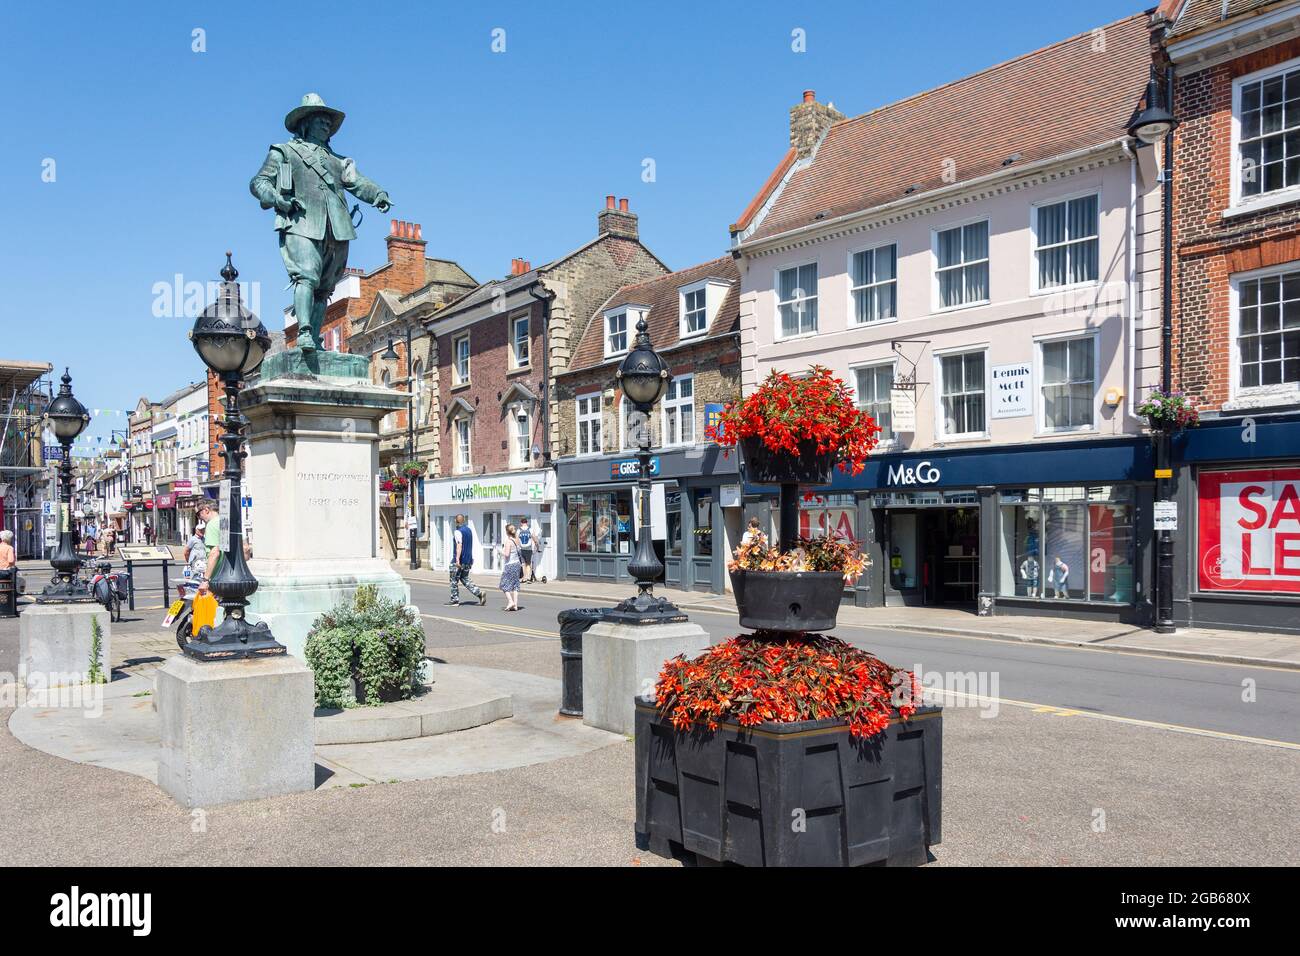 Statue d'Oliver Cromwell, Market Hill, St Ives, Cambridgeshire, Angleterre, Royaume-Uni Banque D'Images